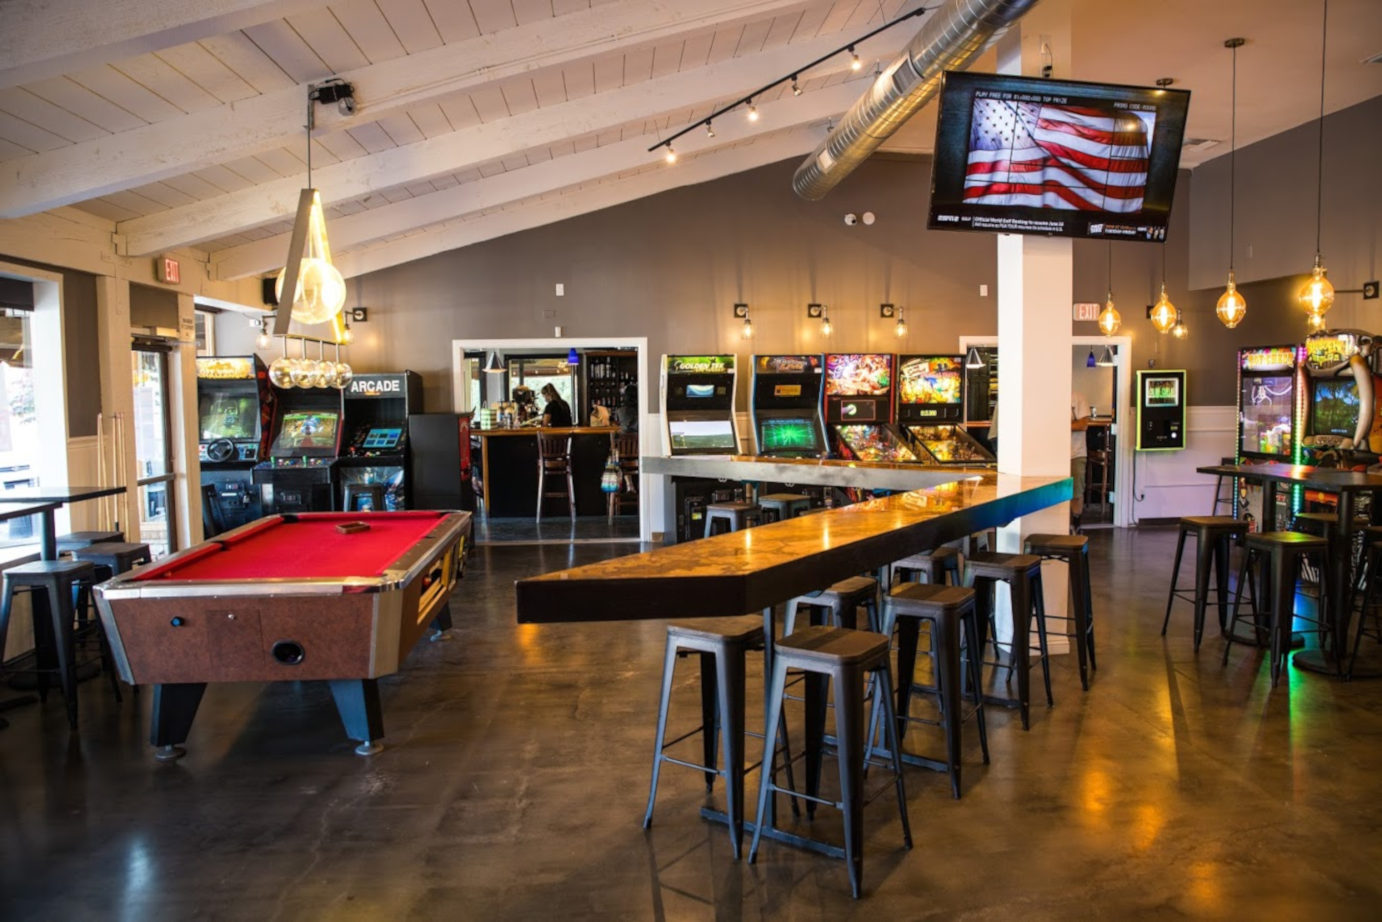 Interior, pool table and arcade games